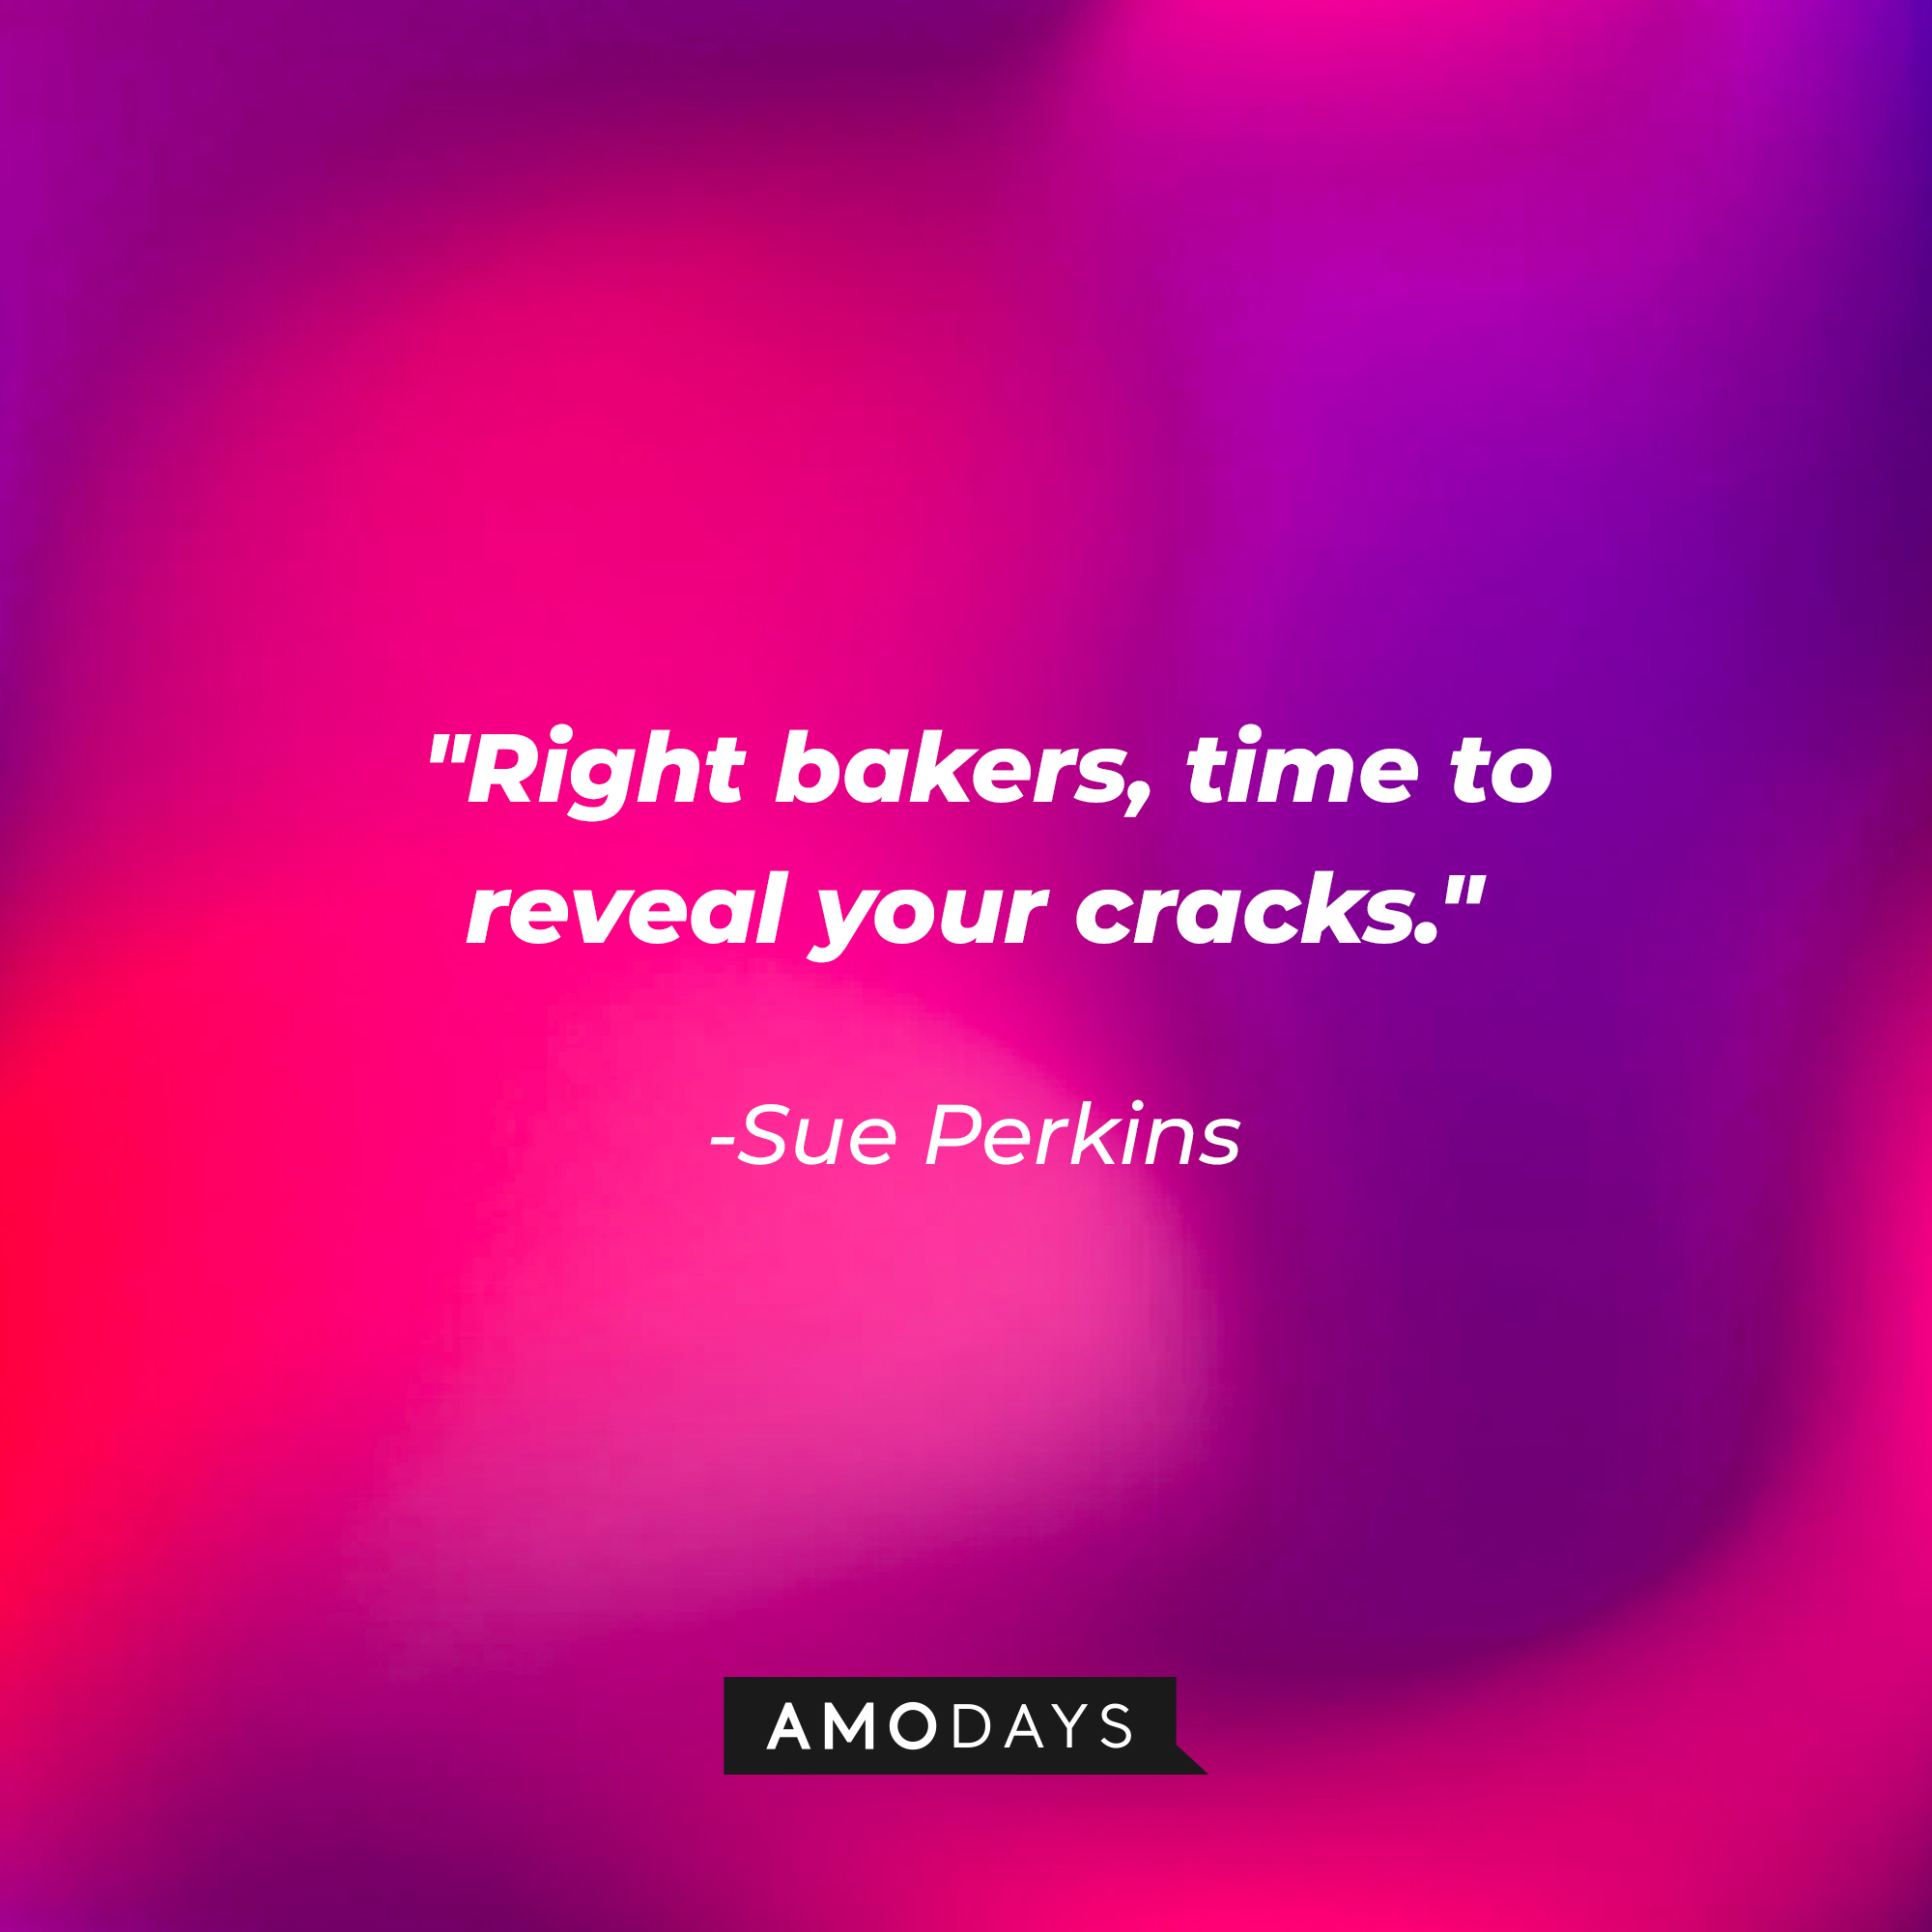 Sue Perkins' quote:  "Right bakers, time to reveal your cracks." | Image: AmoDays